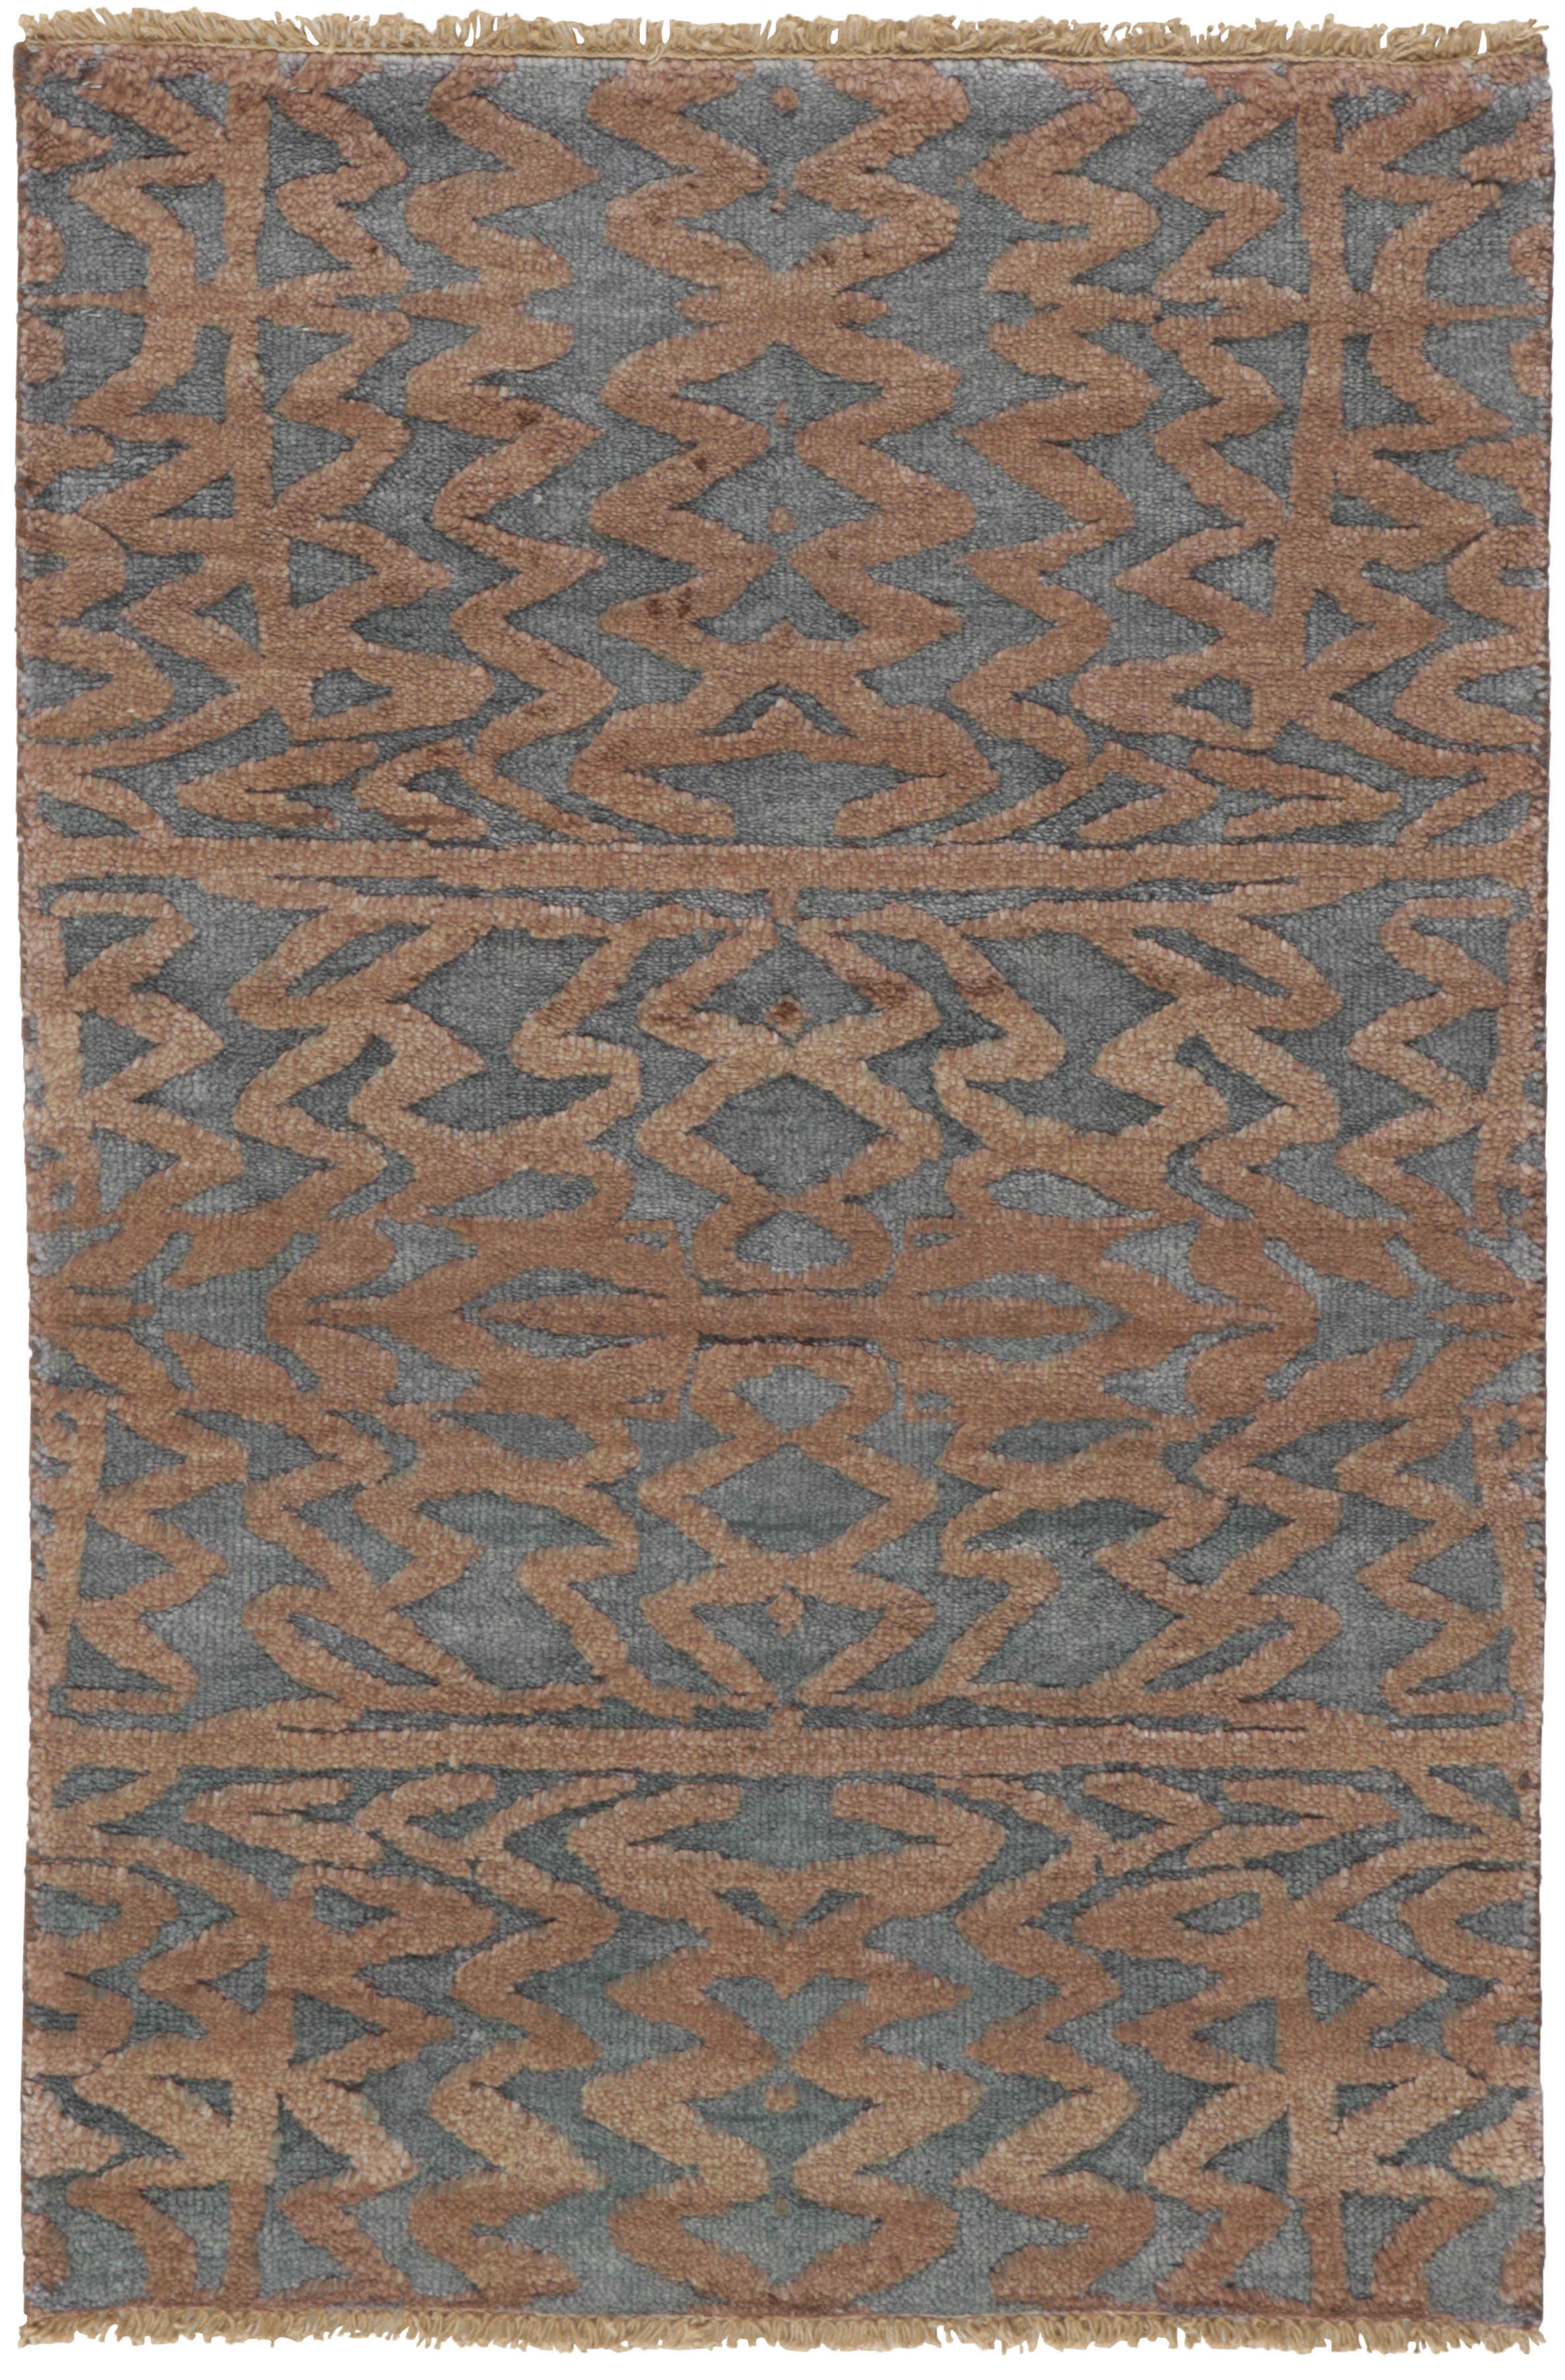 Authentic oriental rug with a damask pattern in grey and beige